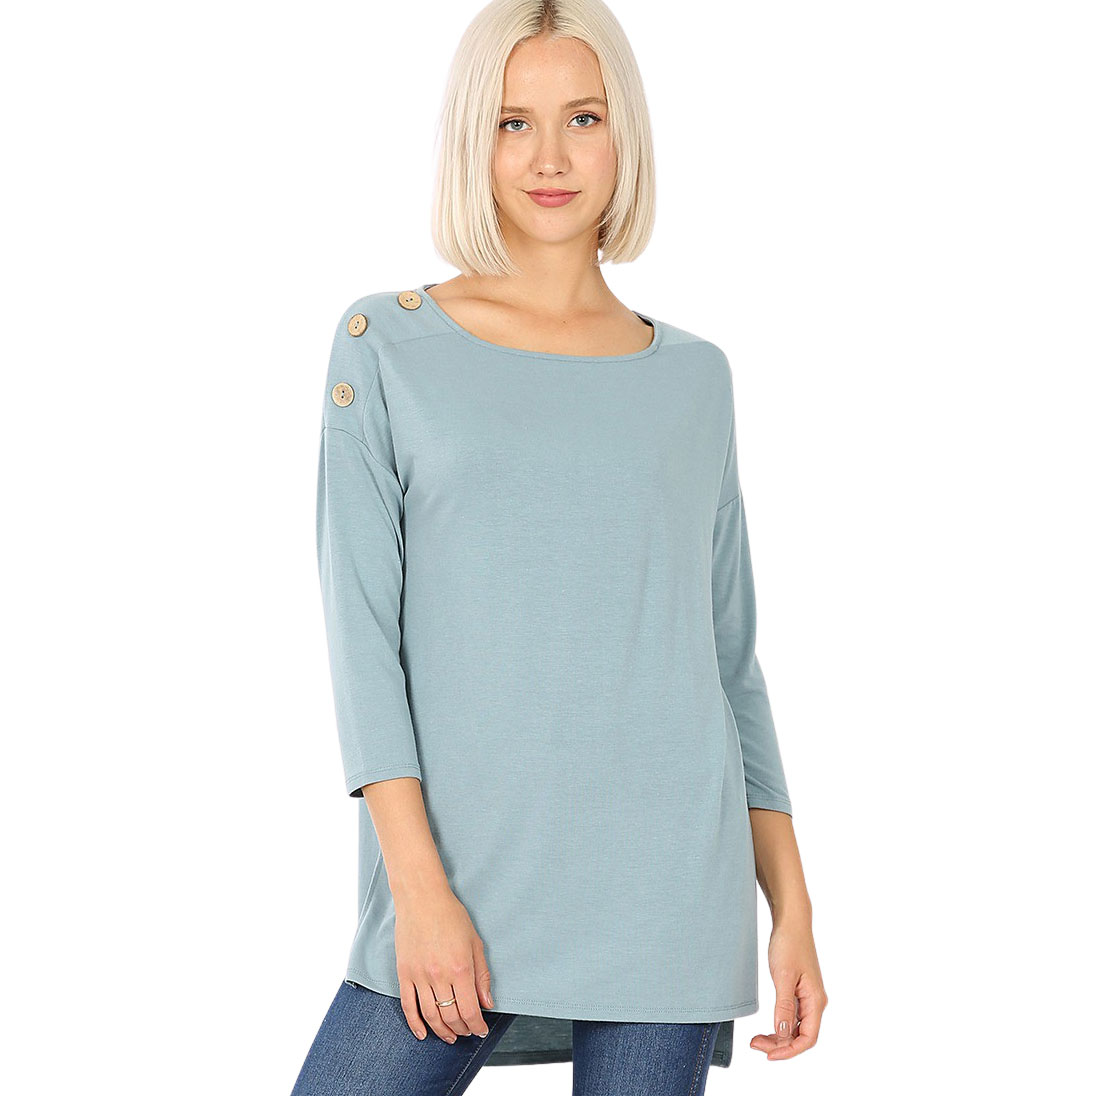 BLUE GREY Boat Neck Hi-Lo Top w/ Wooden Buttons 2082